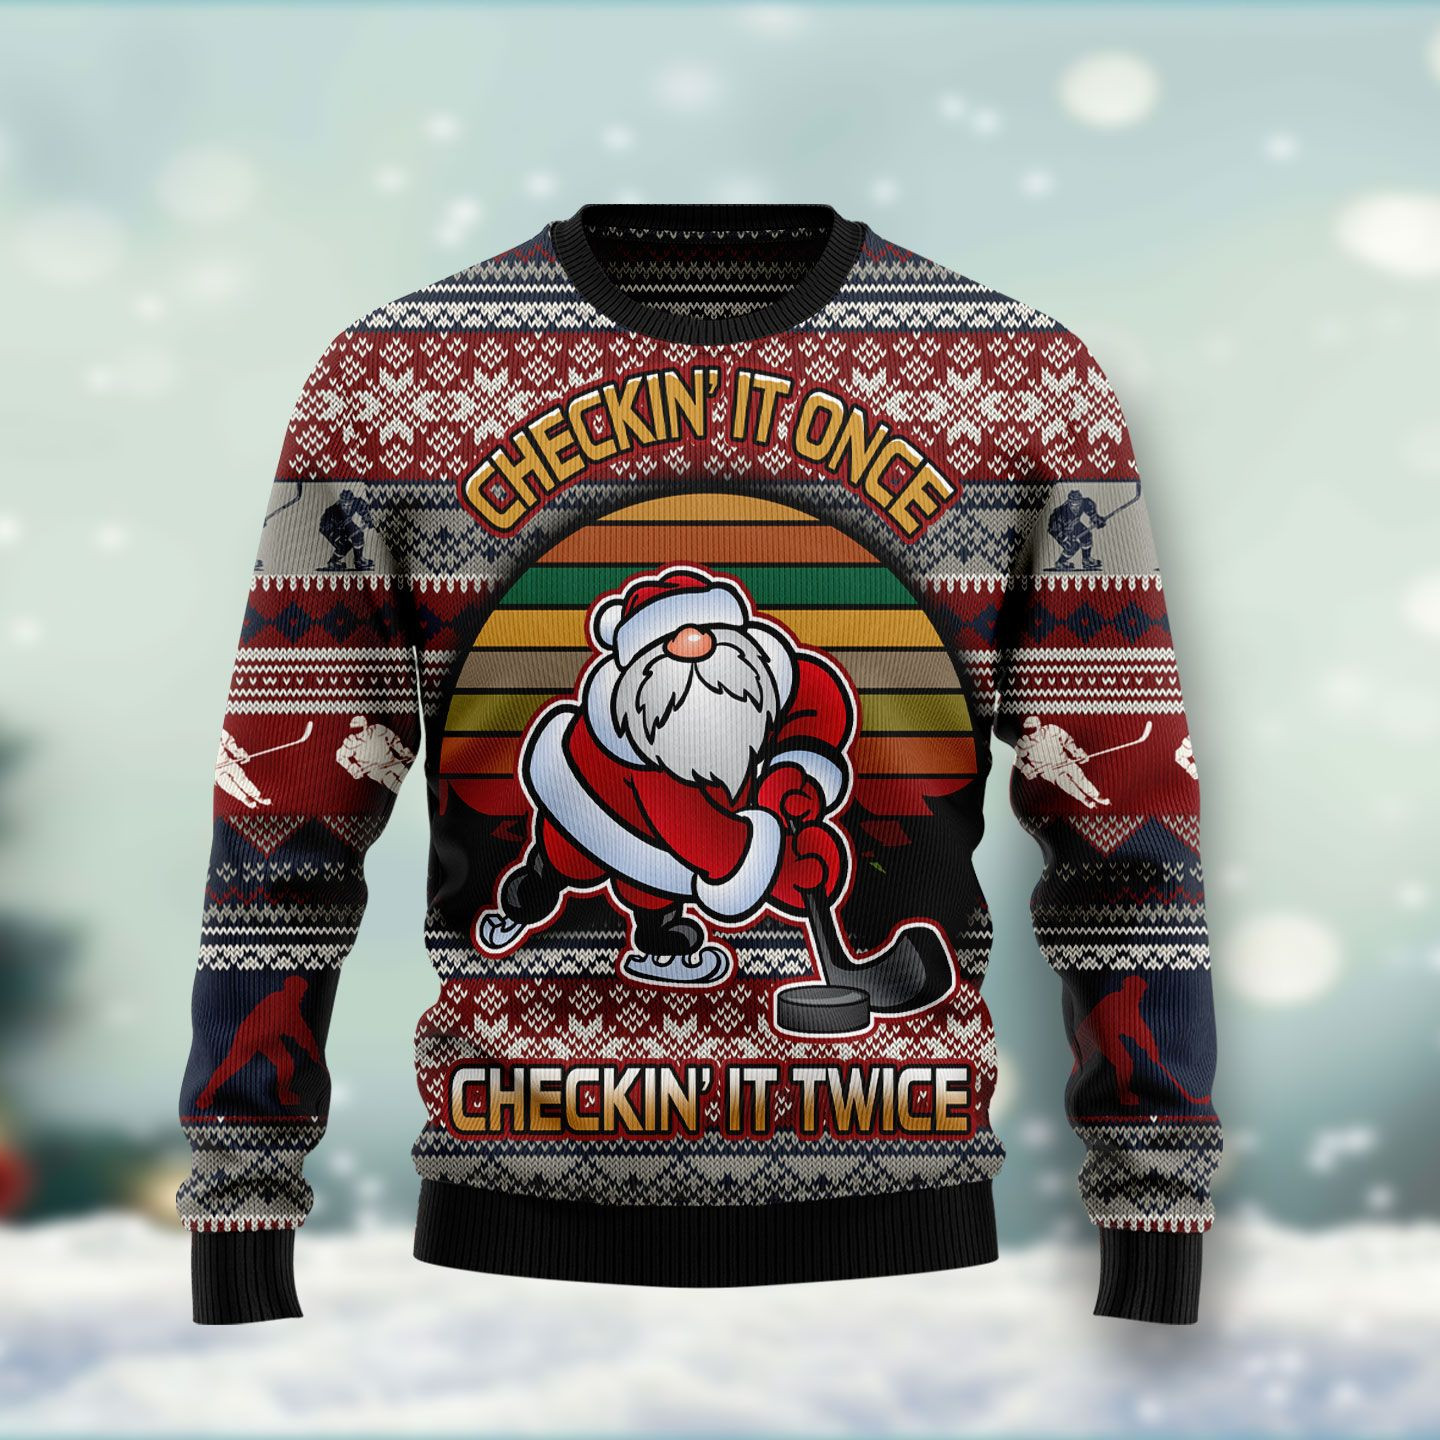 Hockey Checking It Once Checking It Twice Ugly Christmas Sweater Ugly Sweater For Men Women, Holiday Sweater